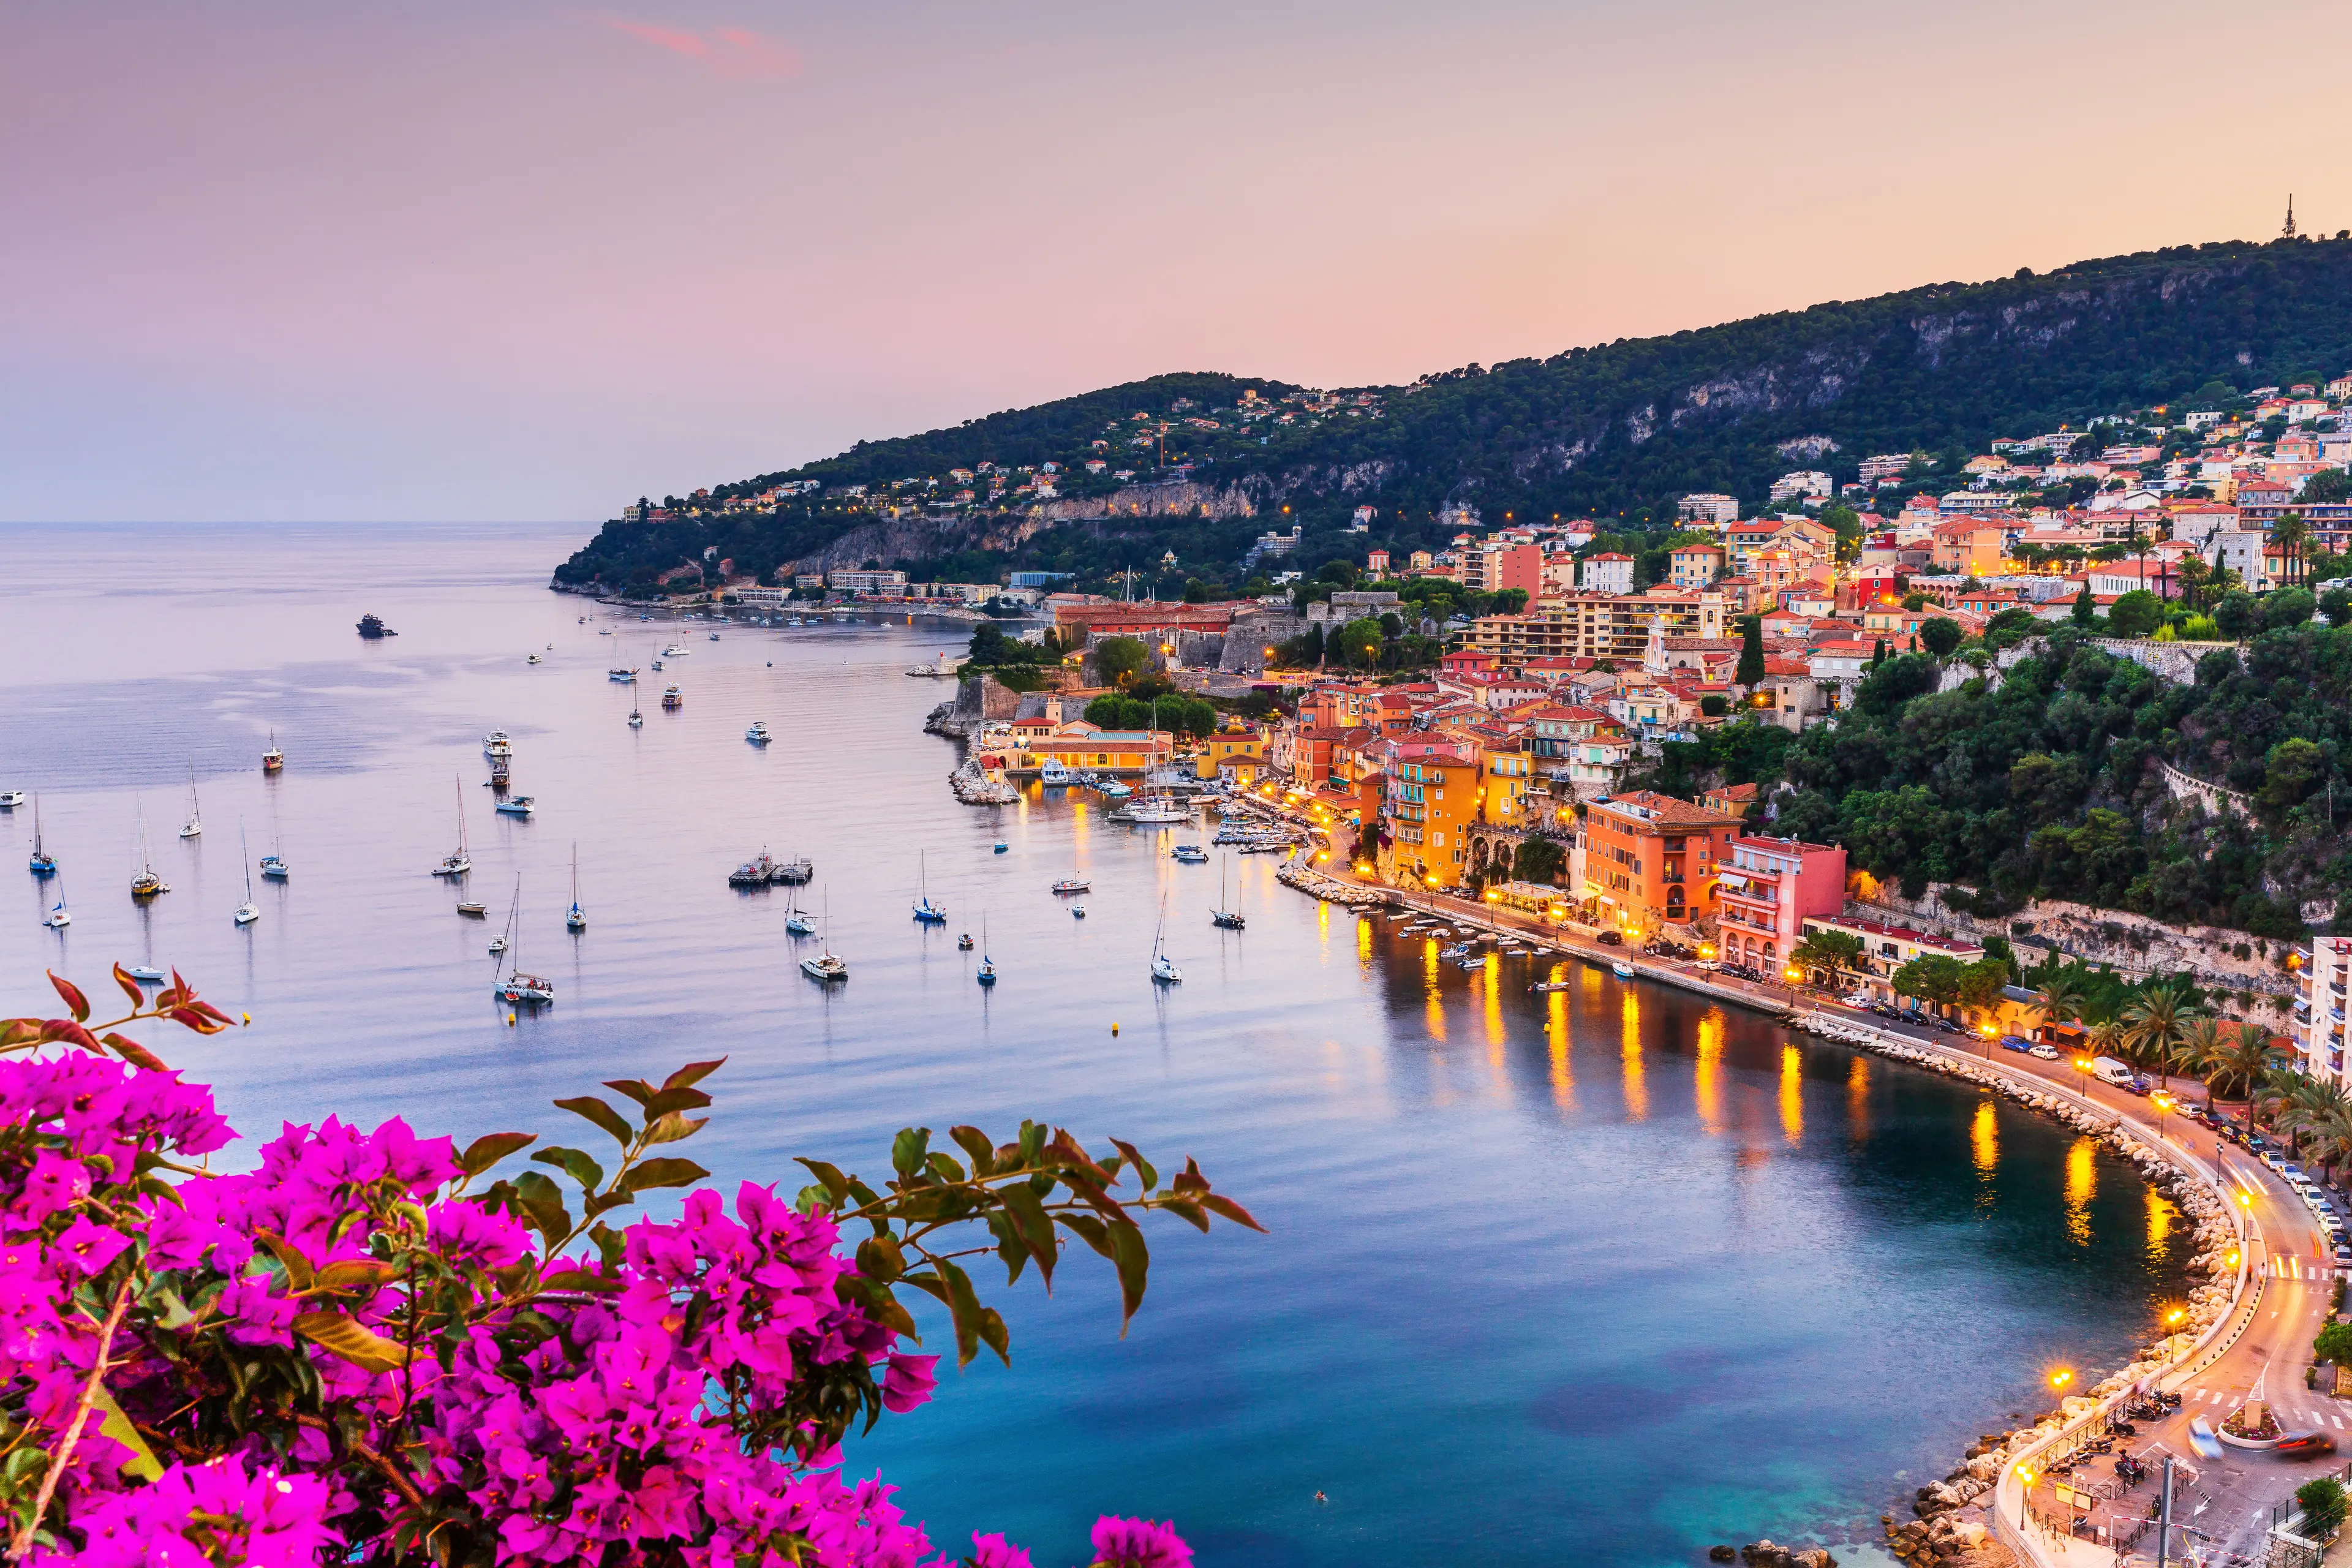 1-Day French Riviera Adventure with Gourmet Food and Wine